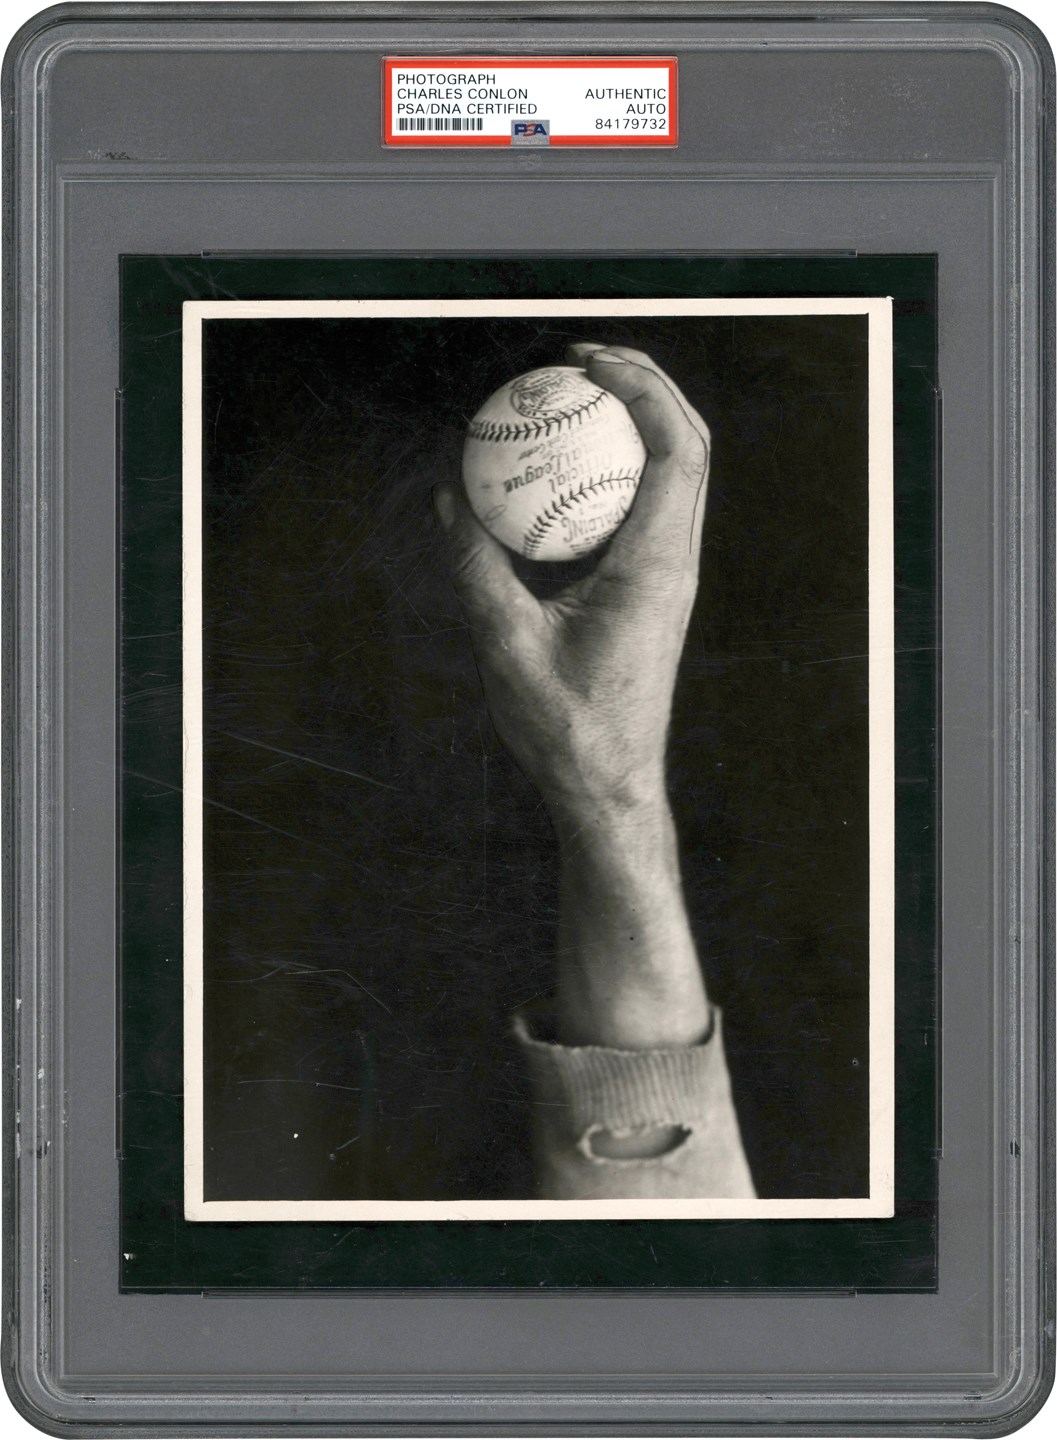 - 1920s Guy Bush "Fastball Grip" Type I Photograph by Charles Conlon - Signed by Conlon on Reverse (PSA)